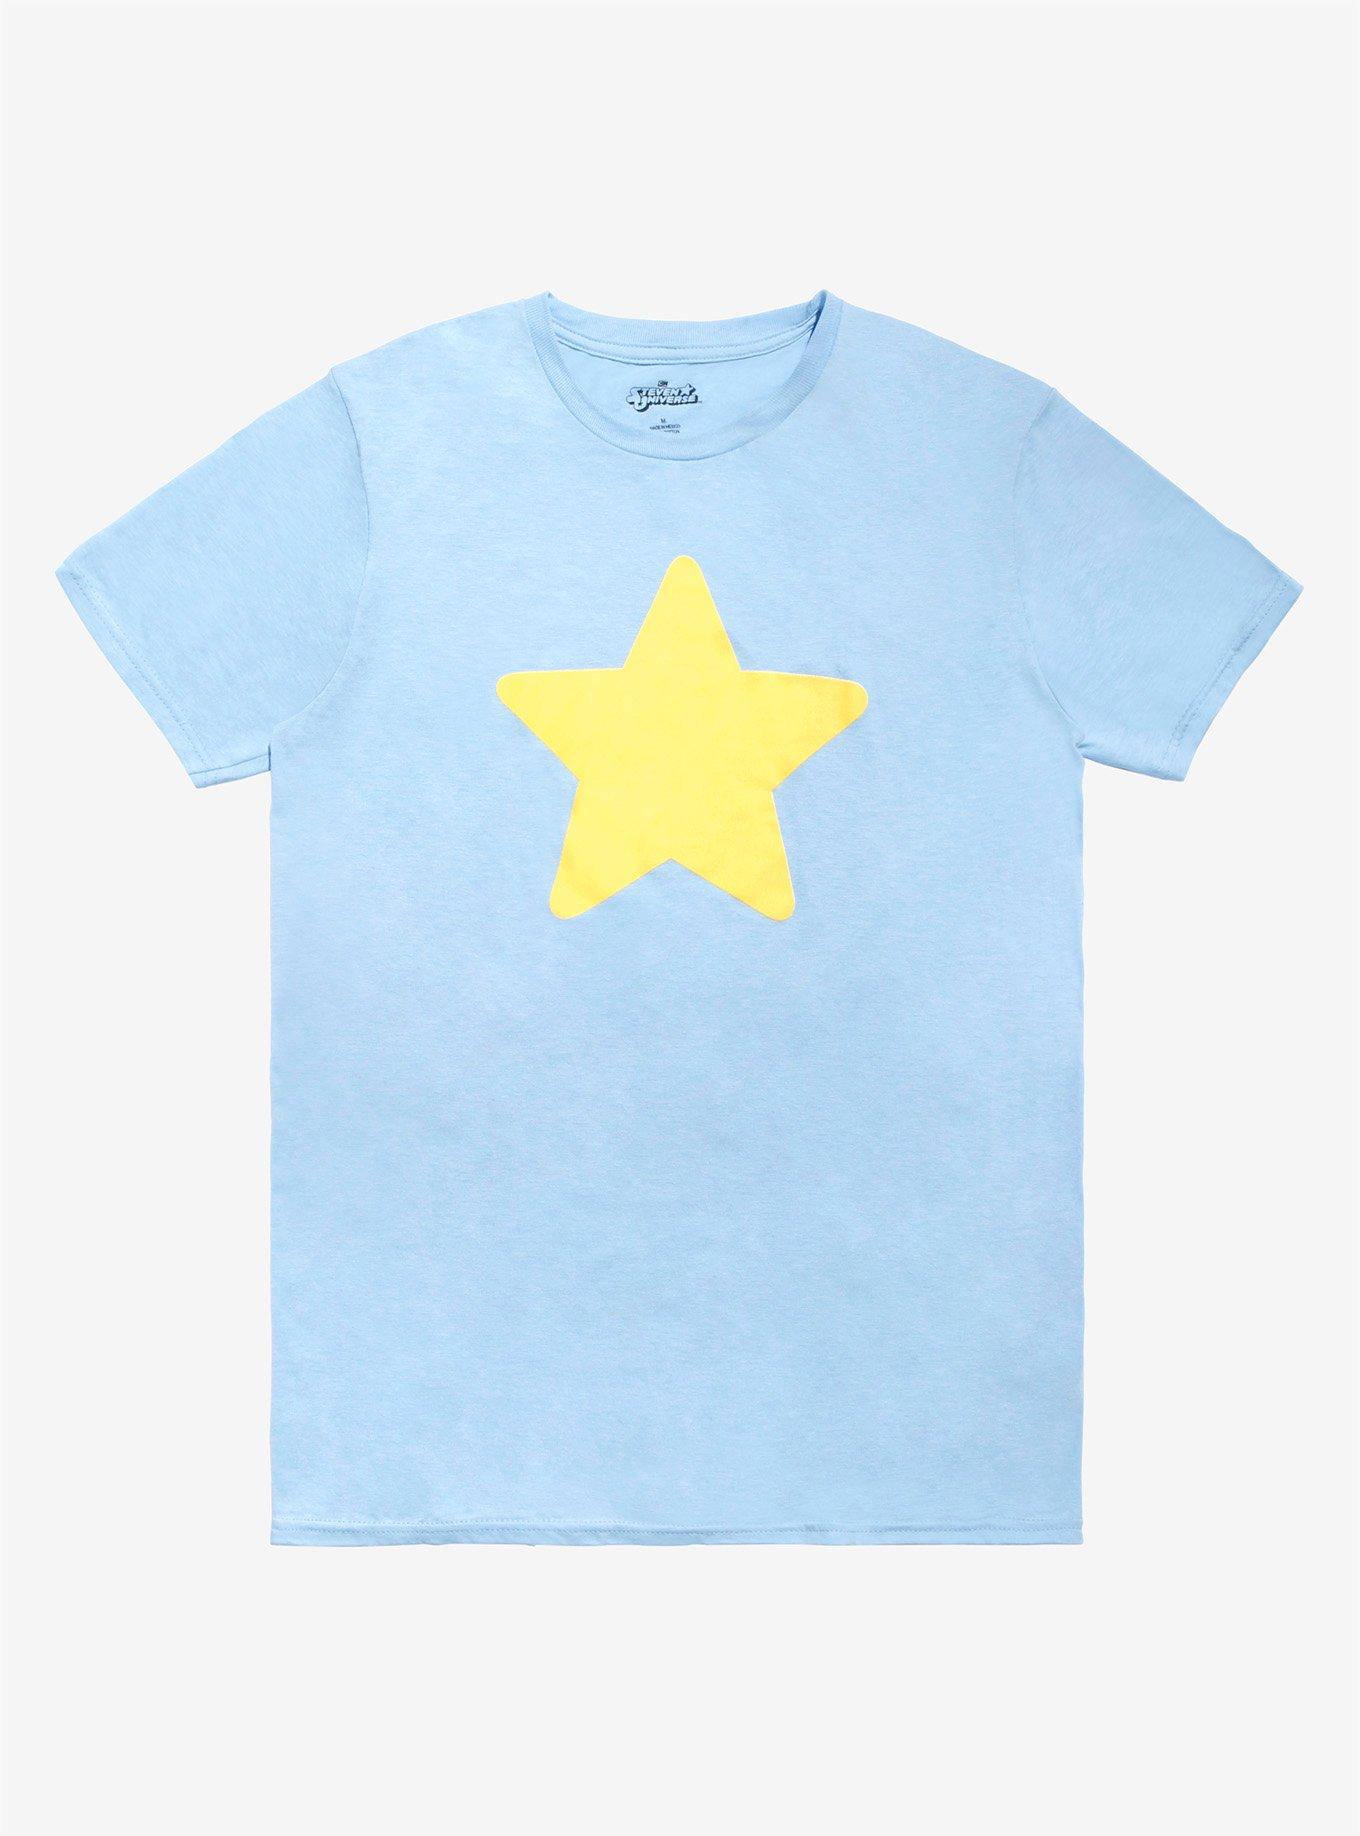 Steven Universe: The Movie Blue Star T-Shirt | Hot Topic